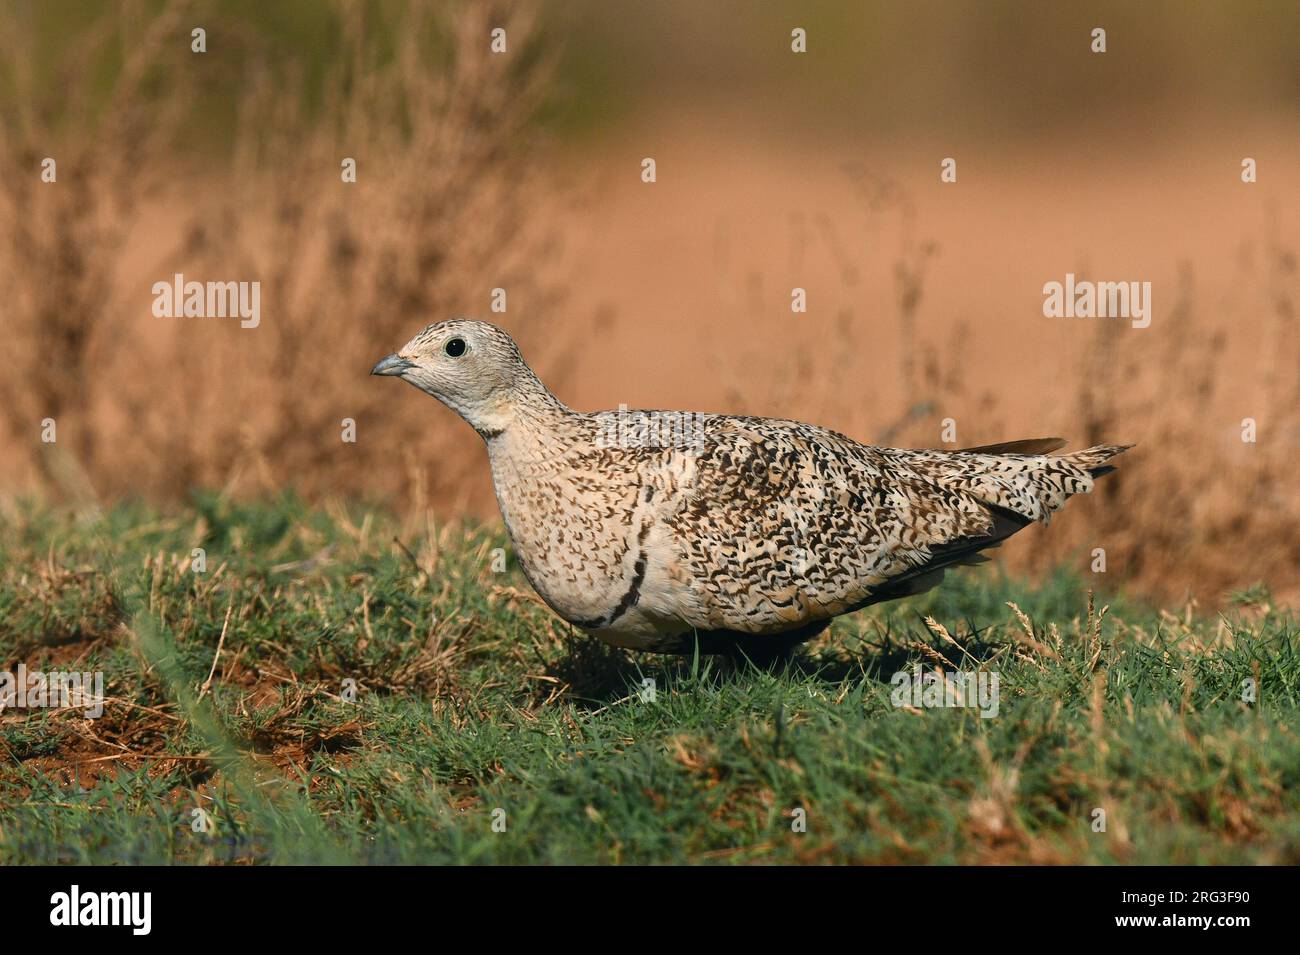 Female Black-bellied Sandgrouse (Pterocles orientalis) at drinking site in Spain. Stock Photo